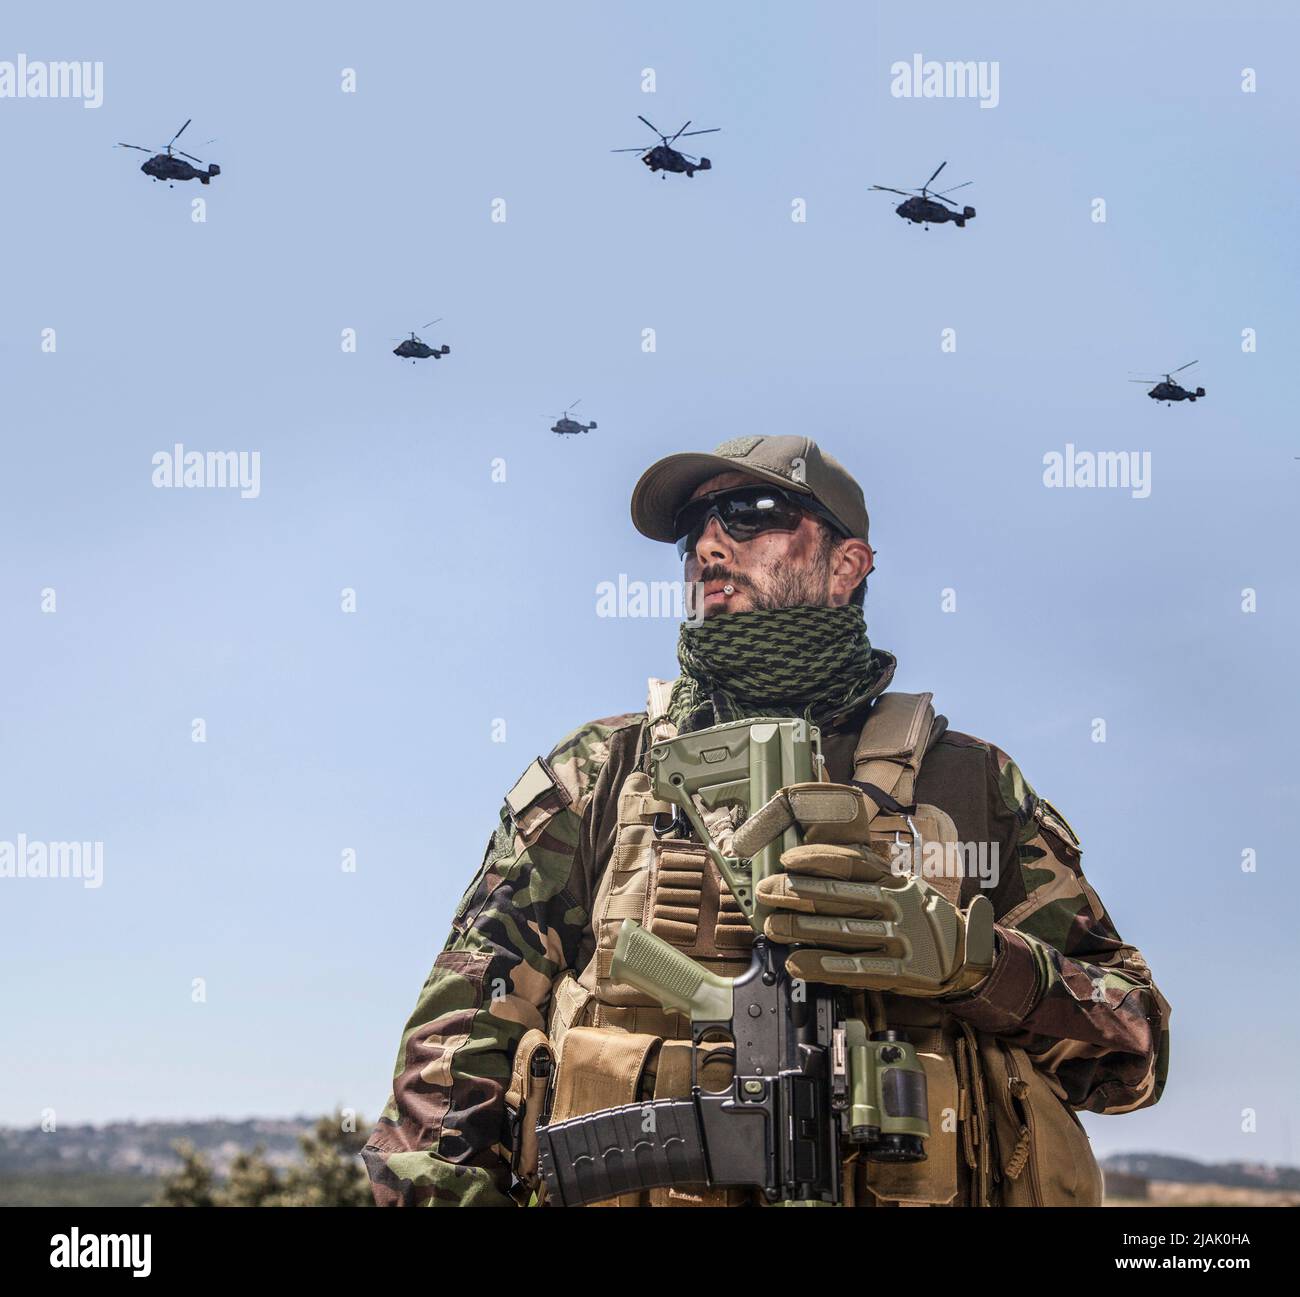 Soldier smoking a cigarette on ground while a convoy of helicopters fly overhead. Stock Photo